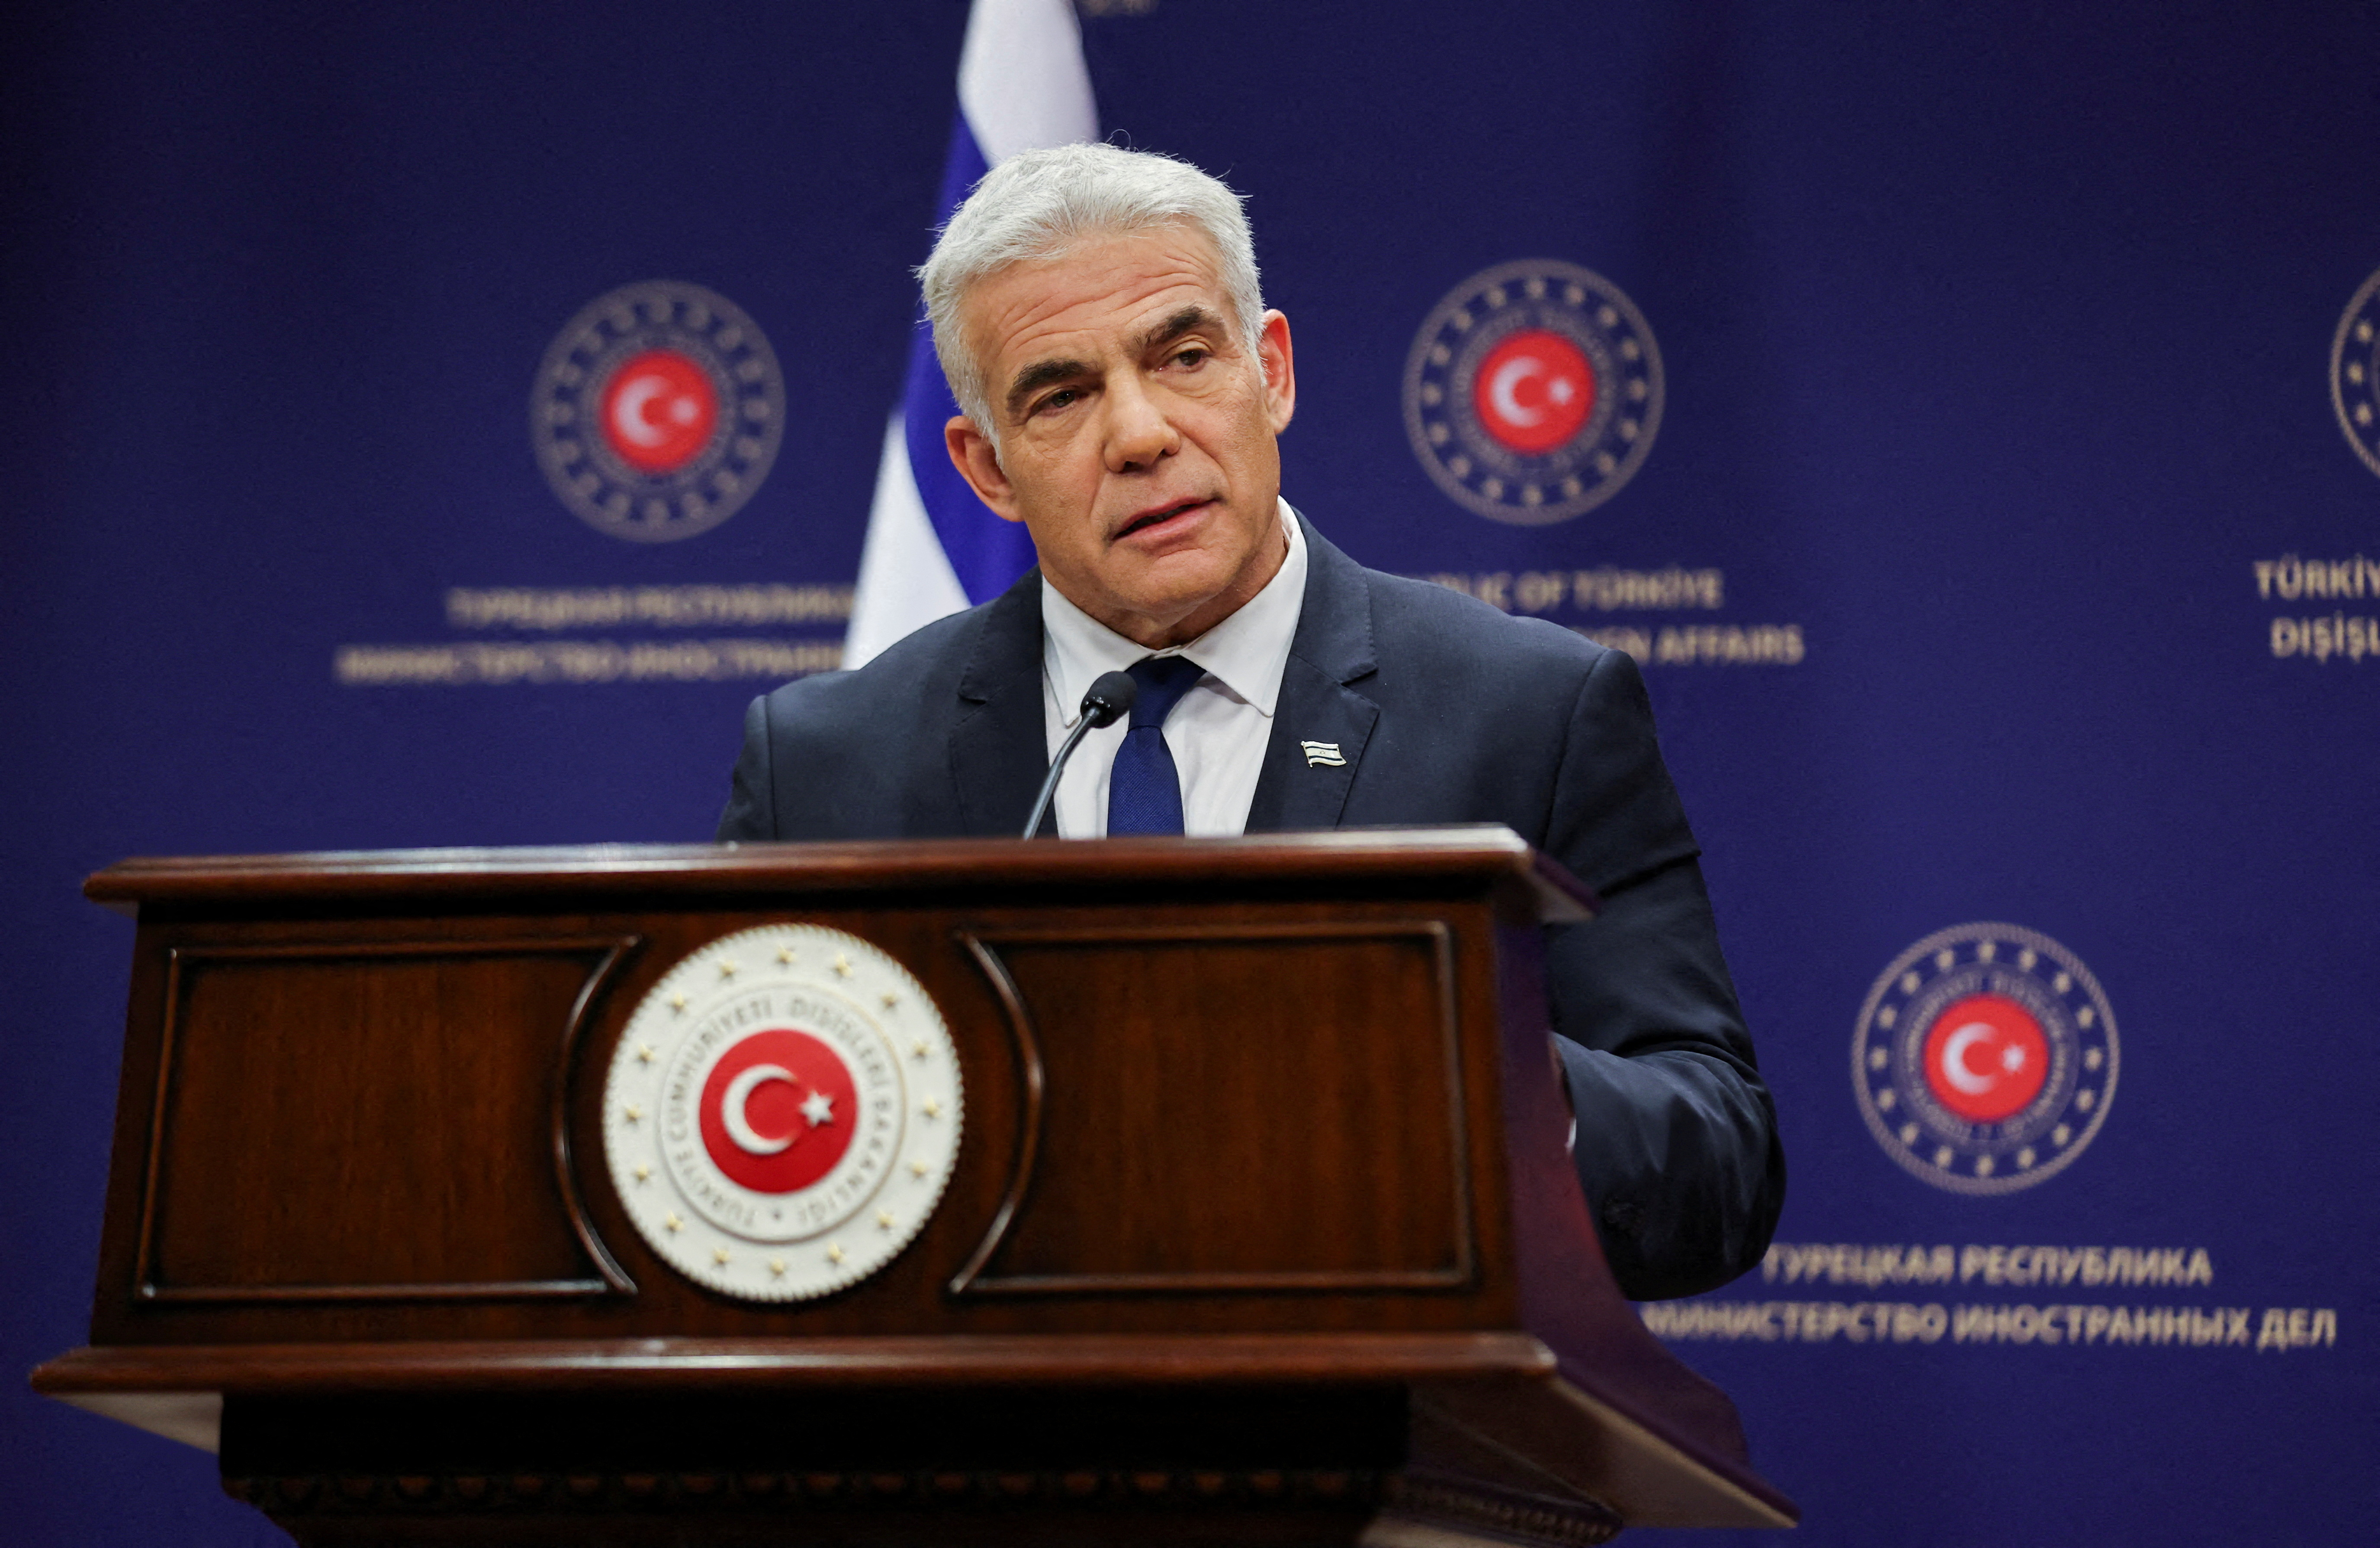 Israel's Foreign Minister Lapid visits Turkey